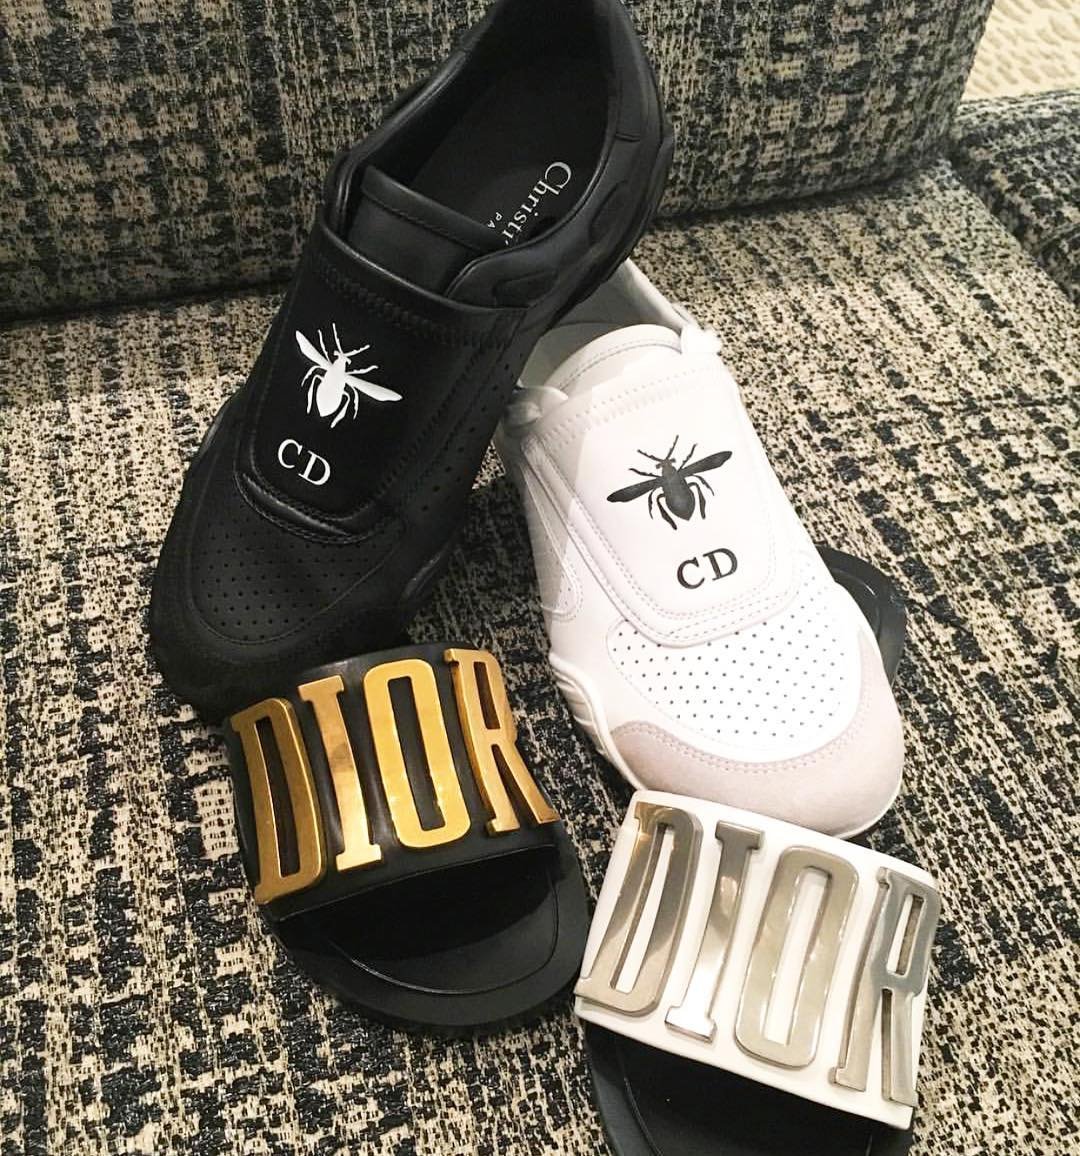 Dio(r)evolution Slippers and D-Bee 